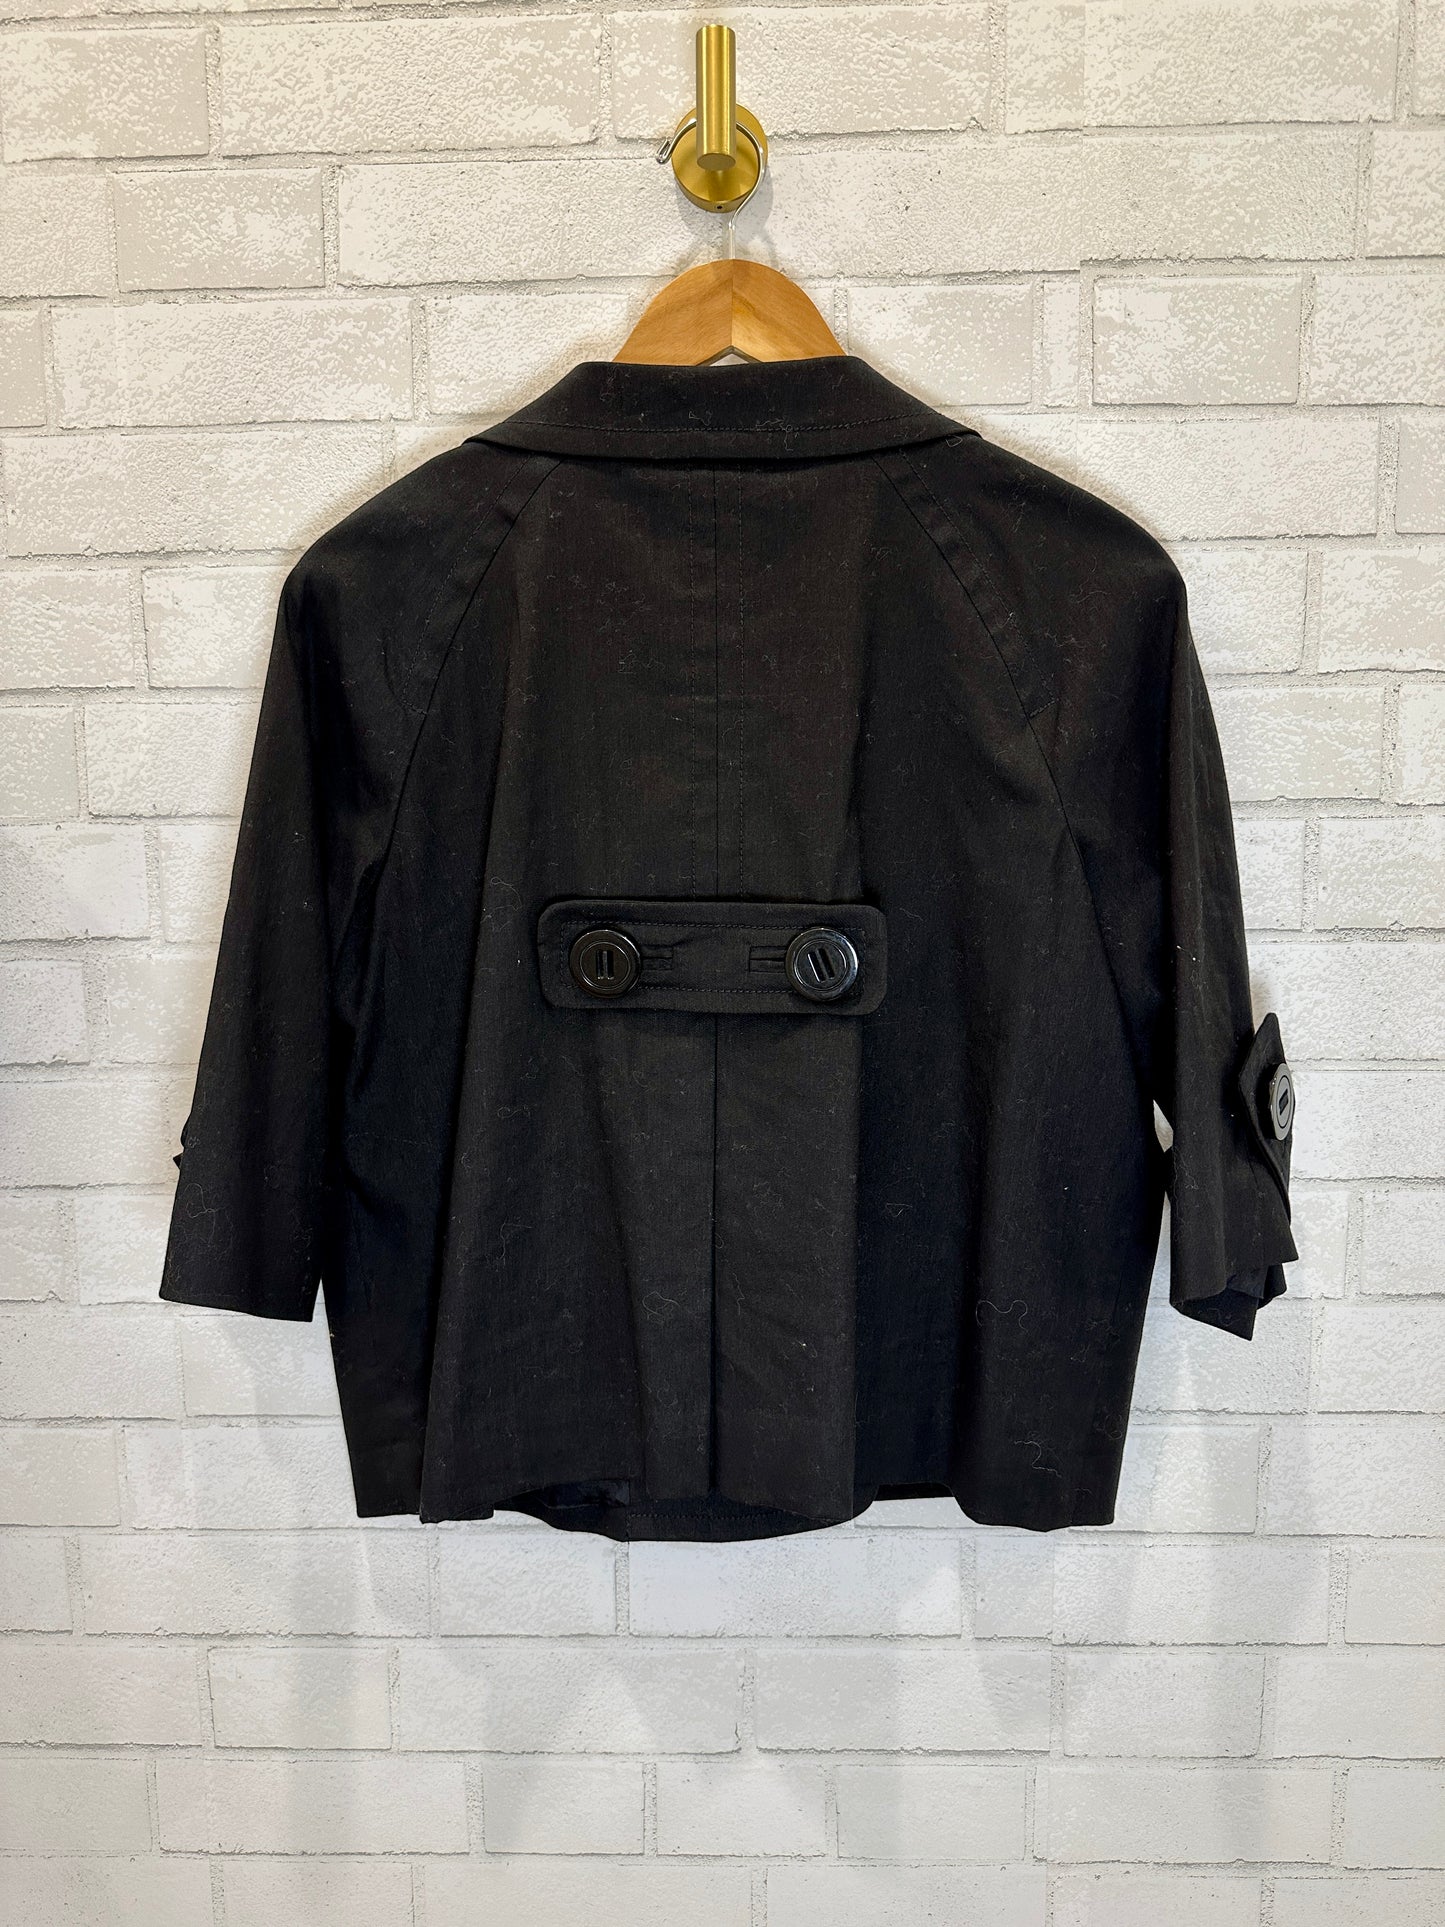 CONTEXT Cropped Jacket size XL